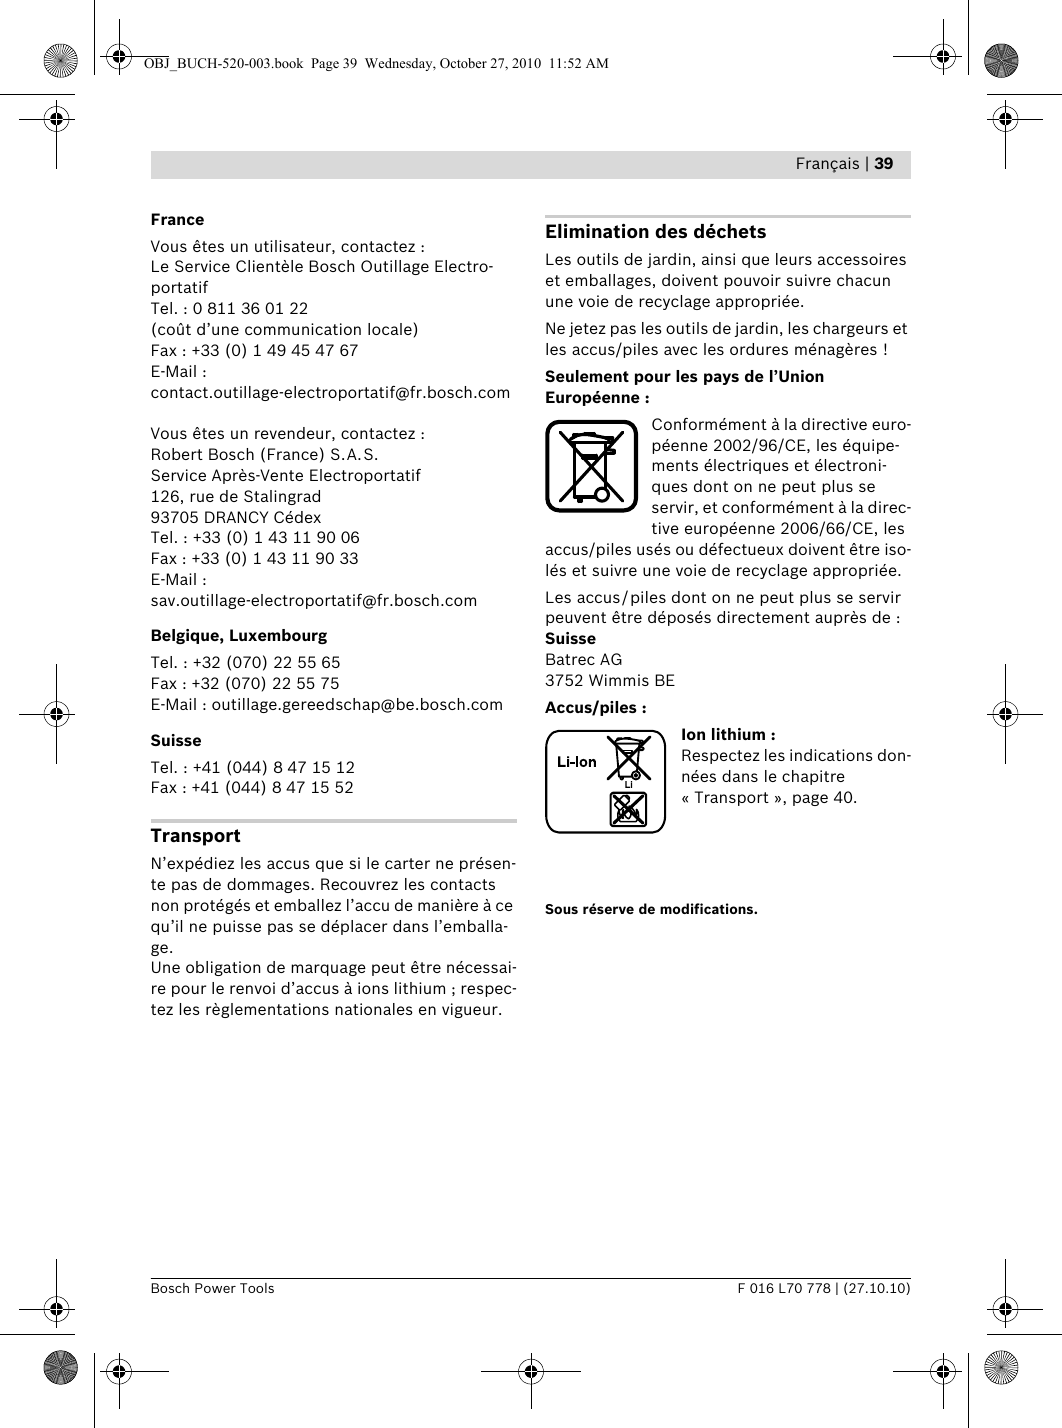 Art26LiManual User Guide Page 39